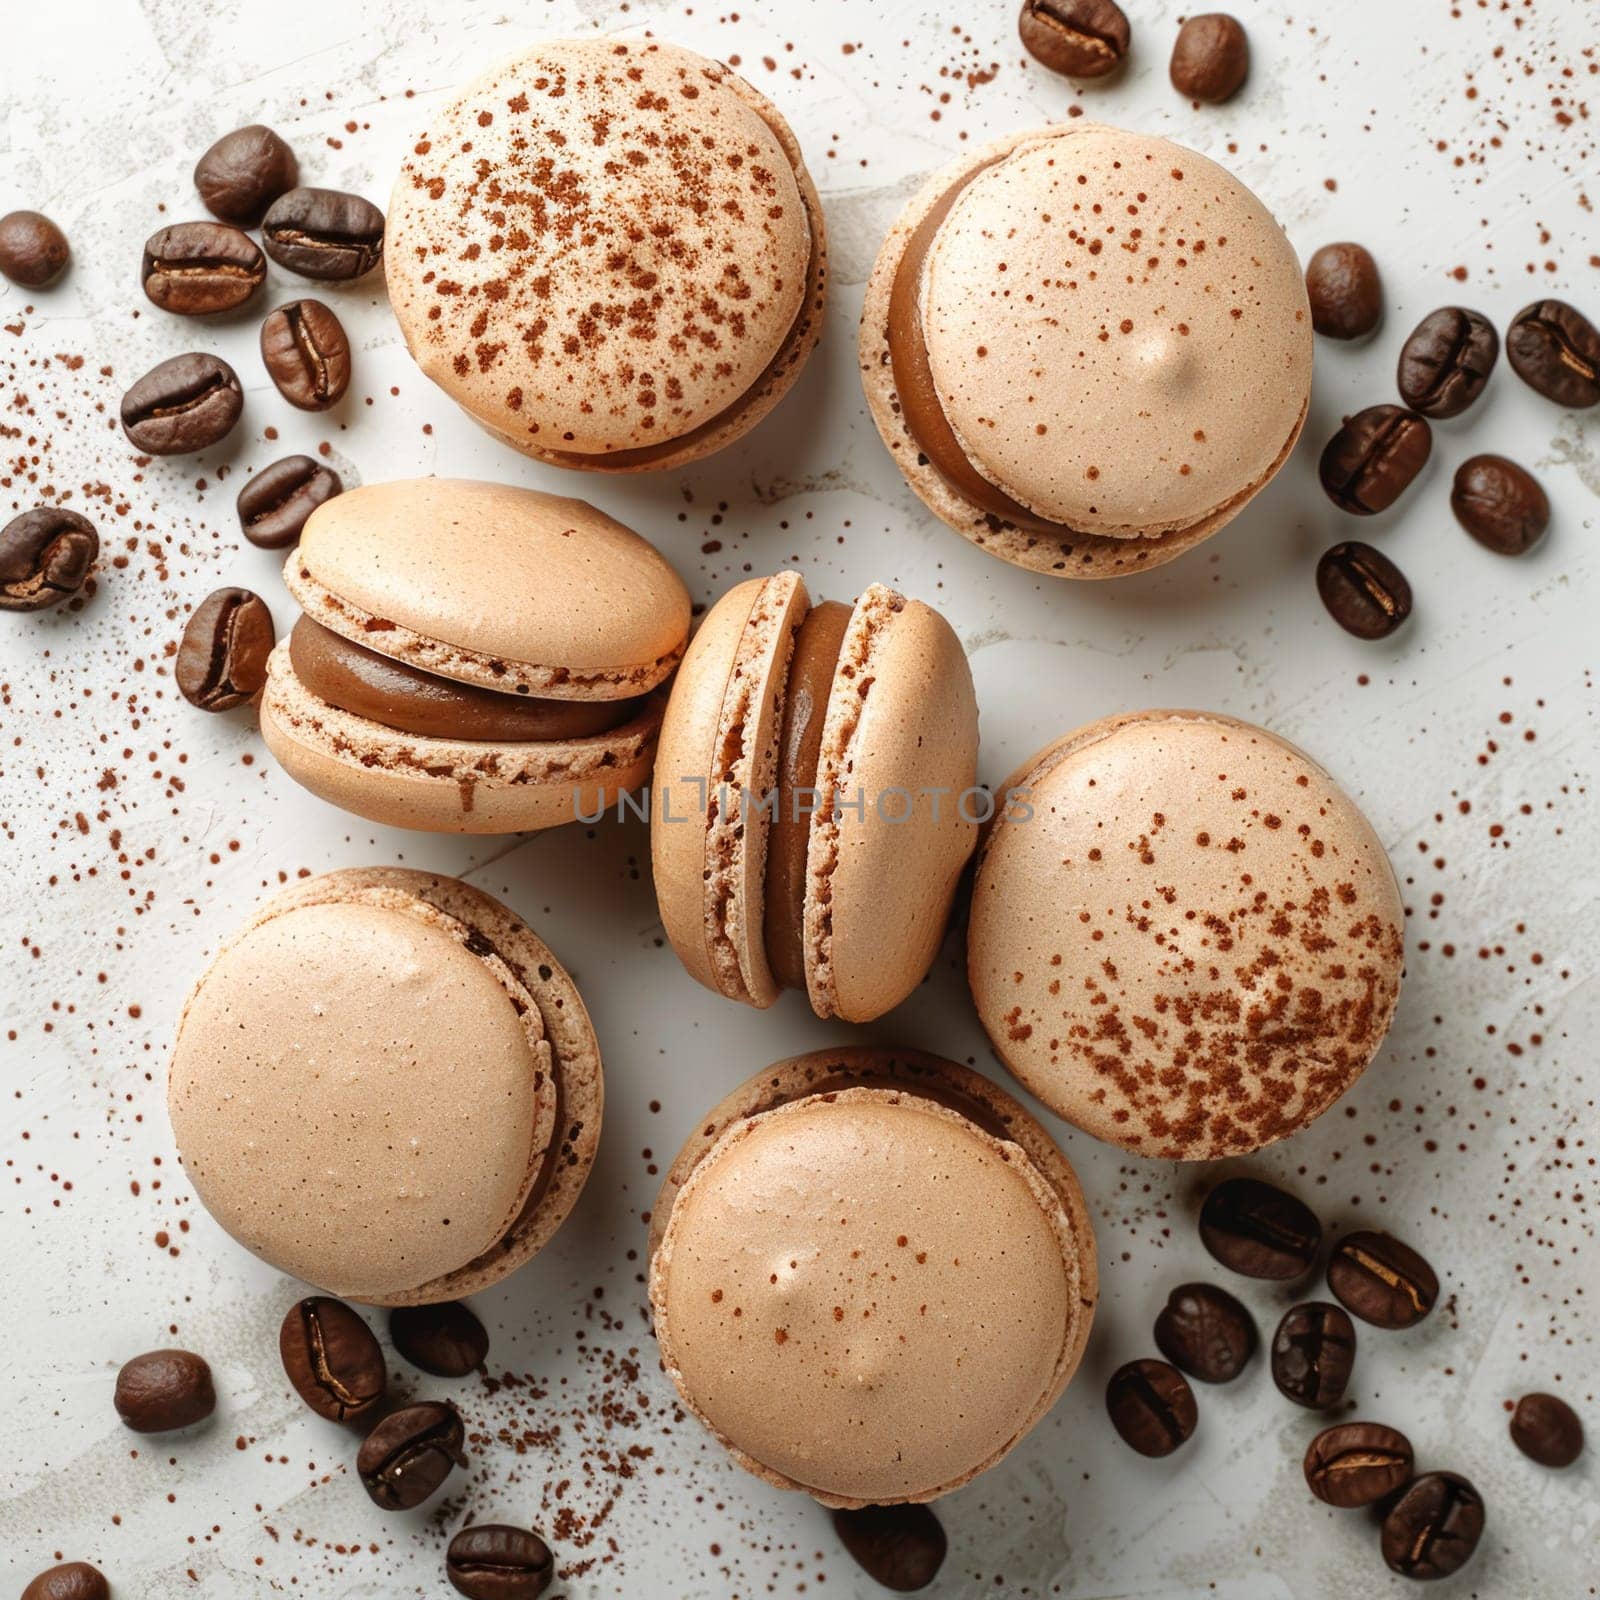 Top view of delicious coffee flavored macaroons.